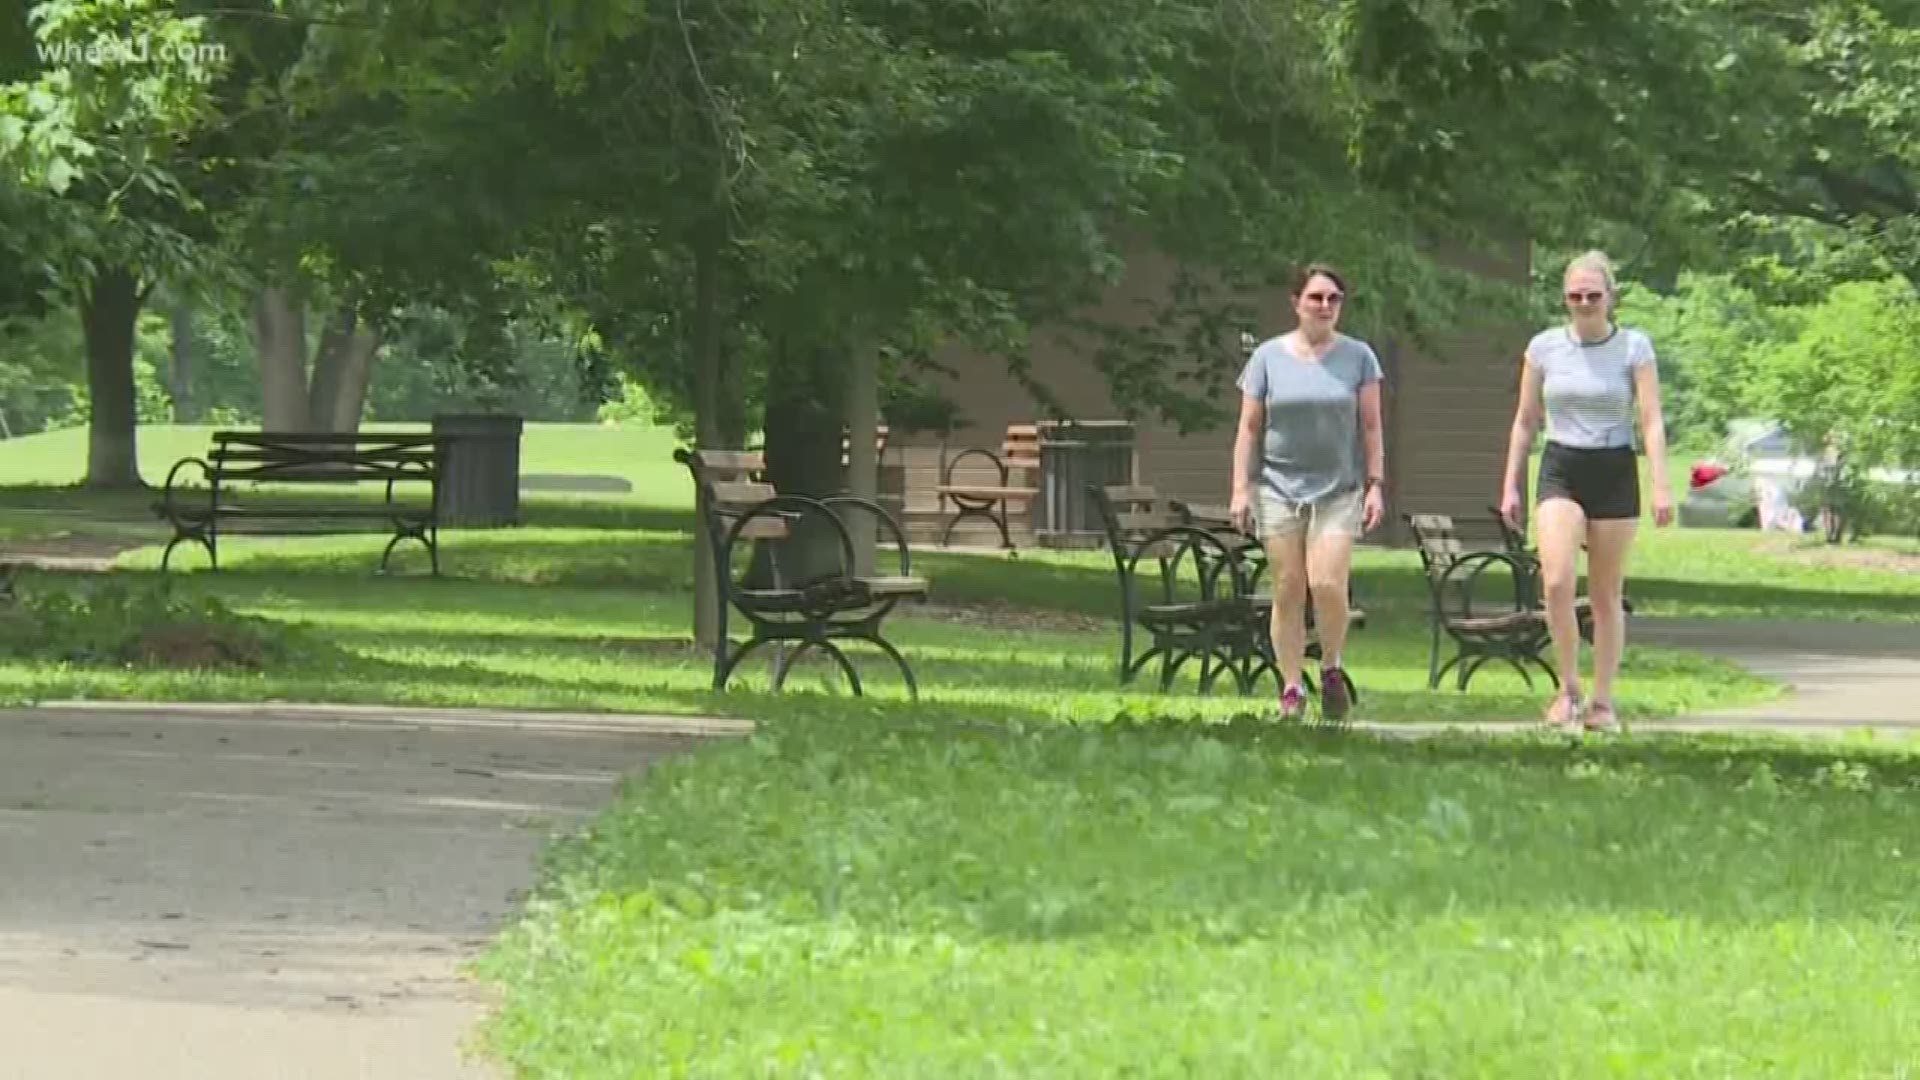 The Trust for Public Land said Louisville parks were some of the worst in the country, but leaders say the report does not take everything into consideration.